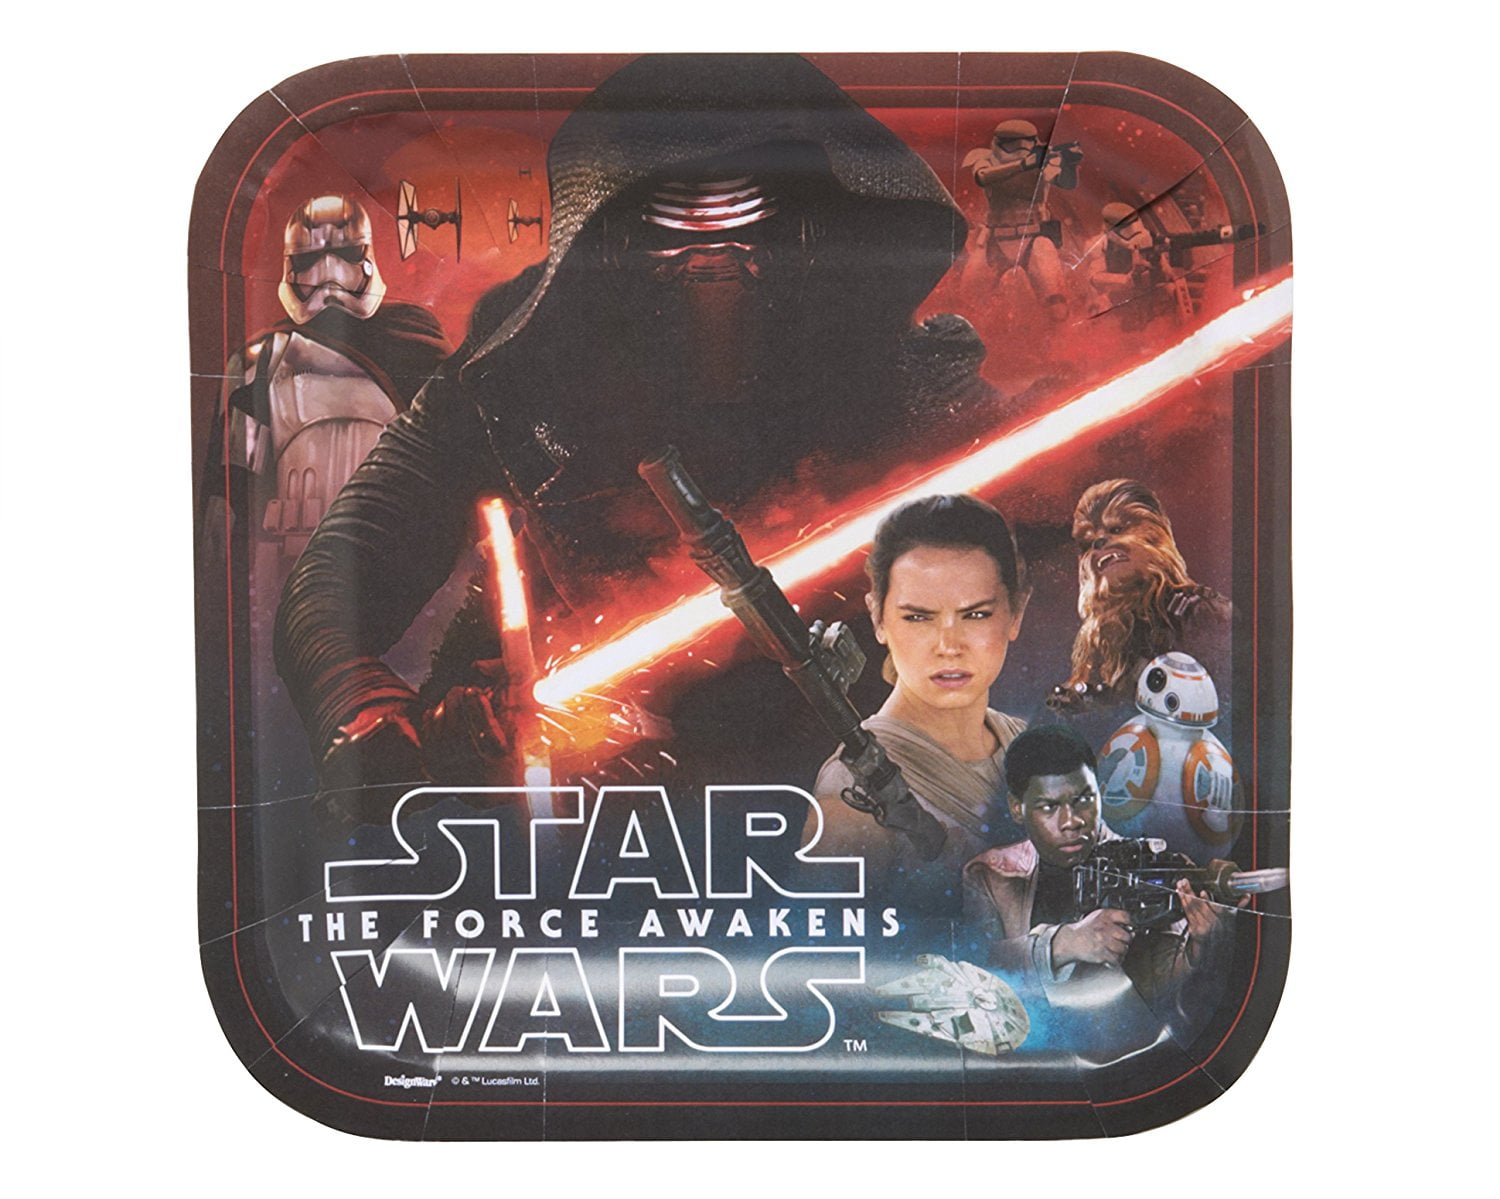 Star Wars The Force Awakens Large Lunch Plates New in Package 